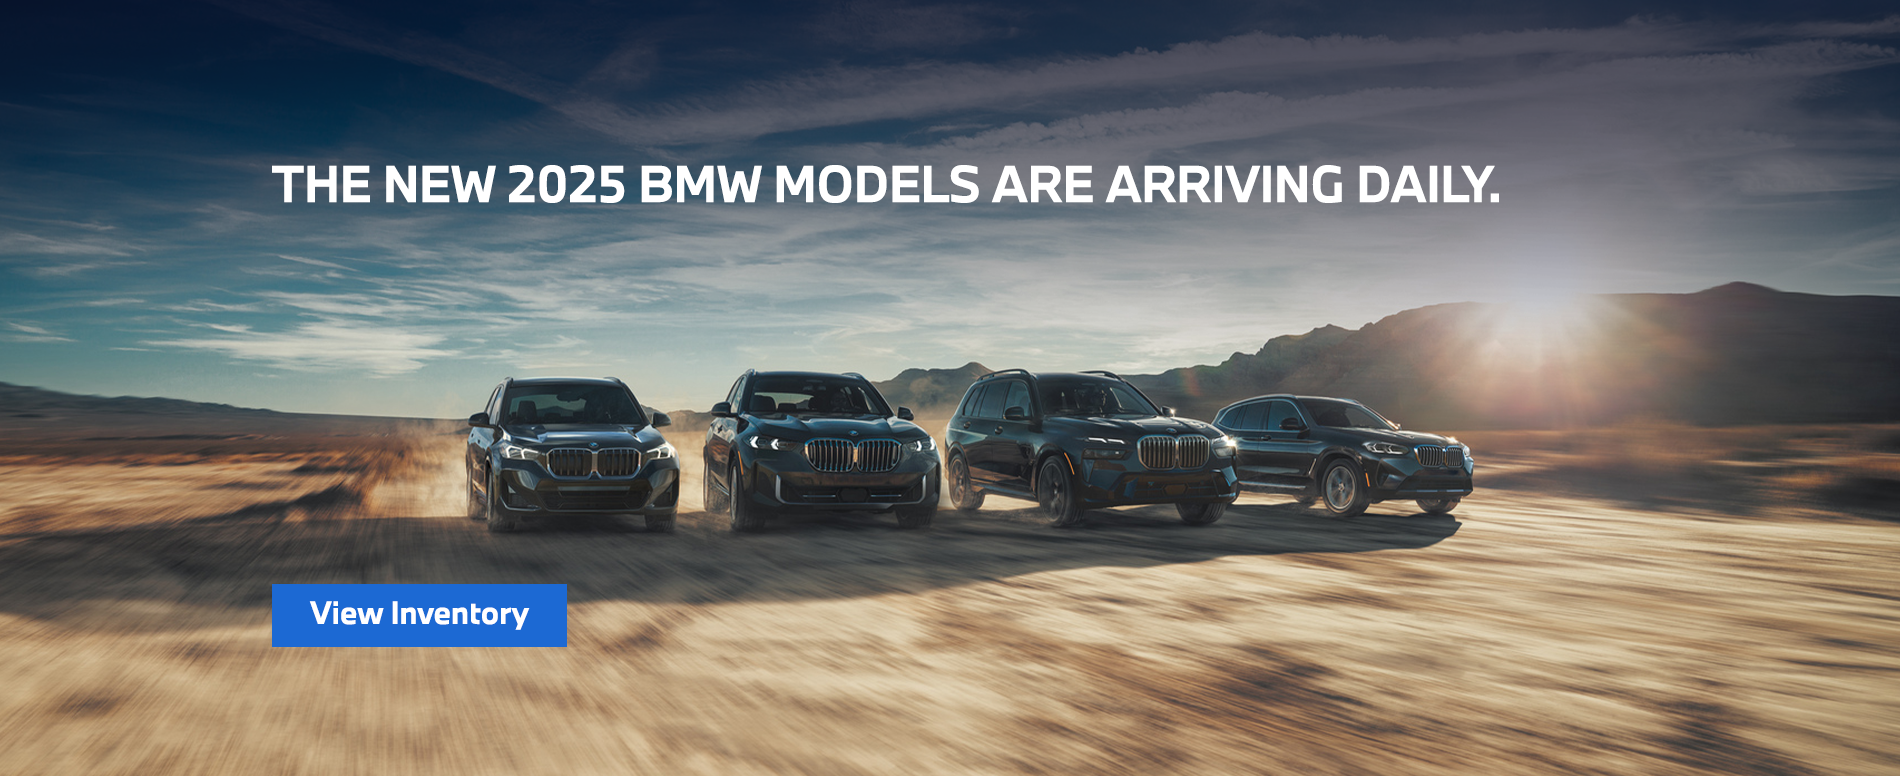 The new 2025 models are arriving daily.